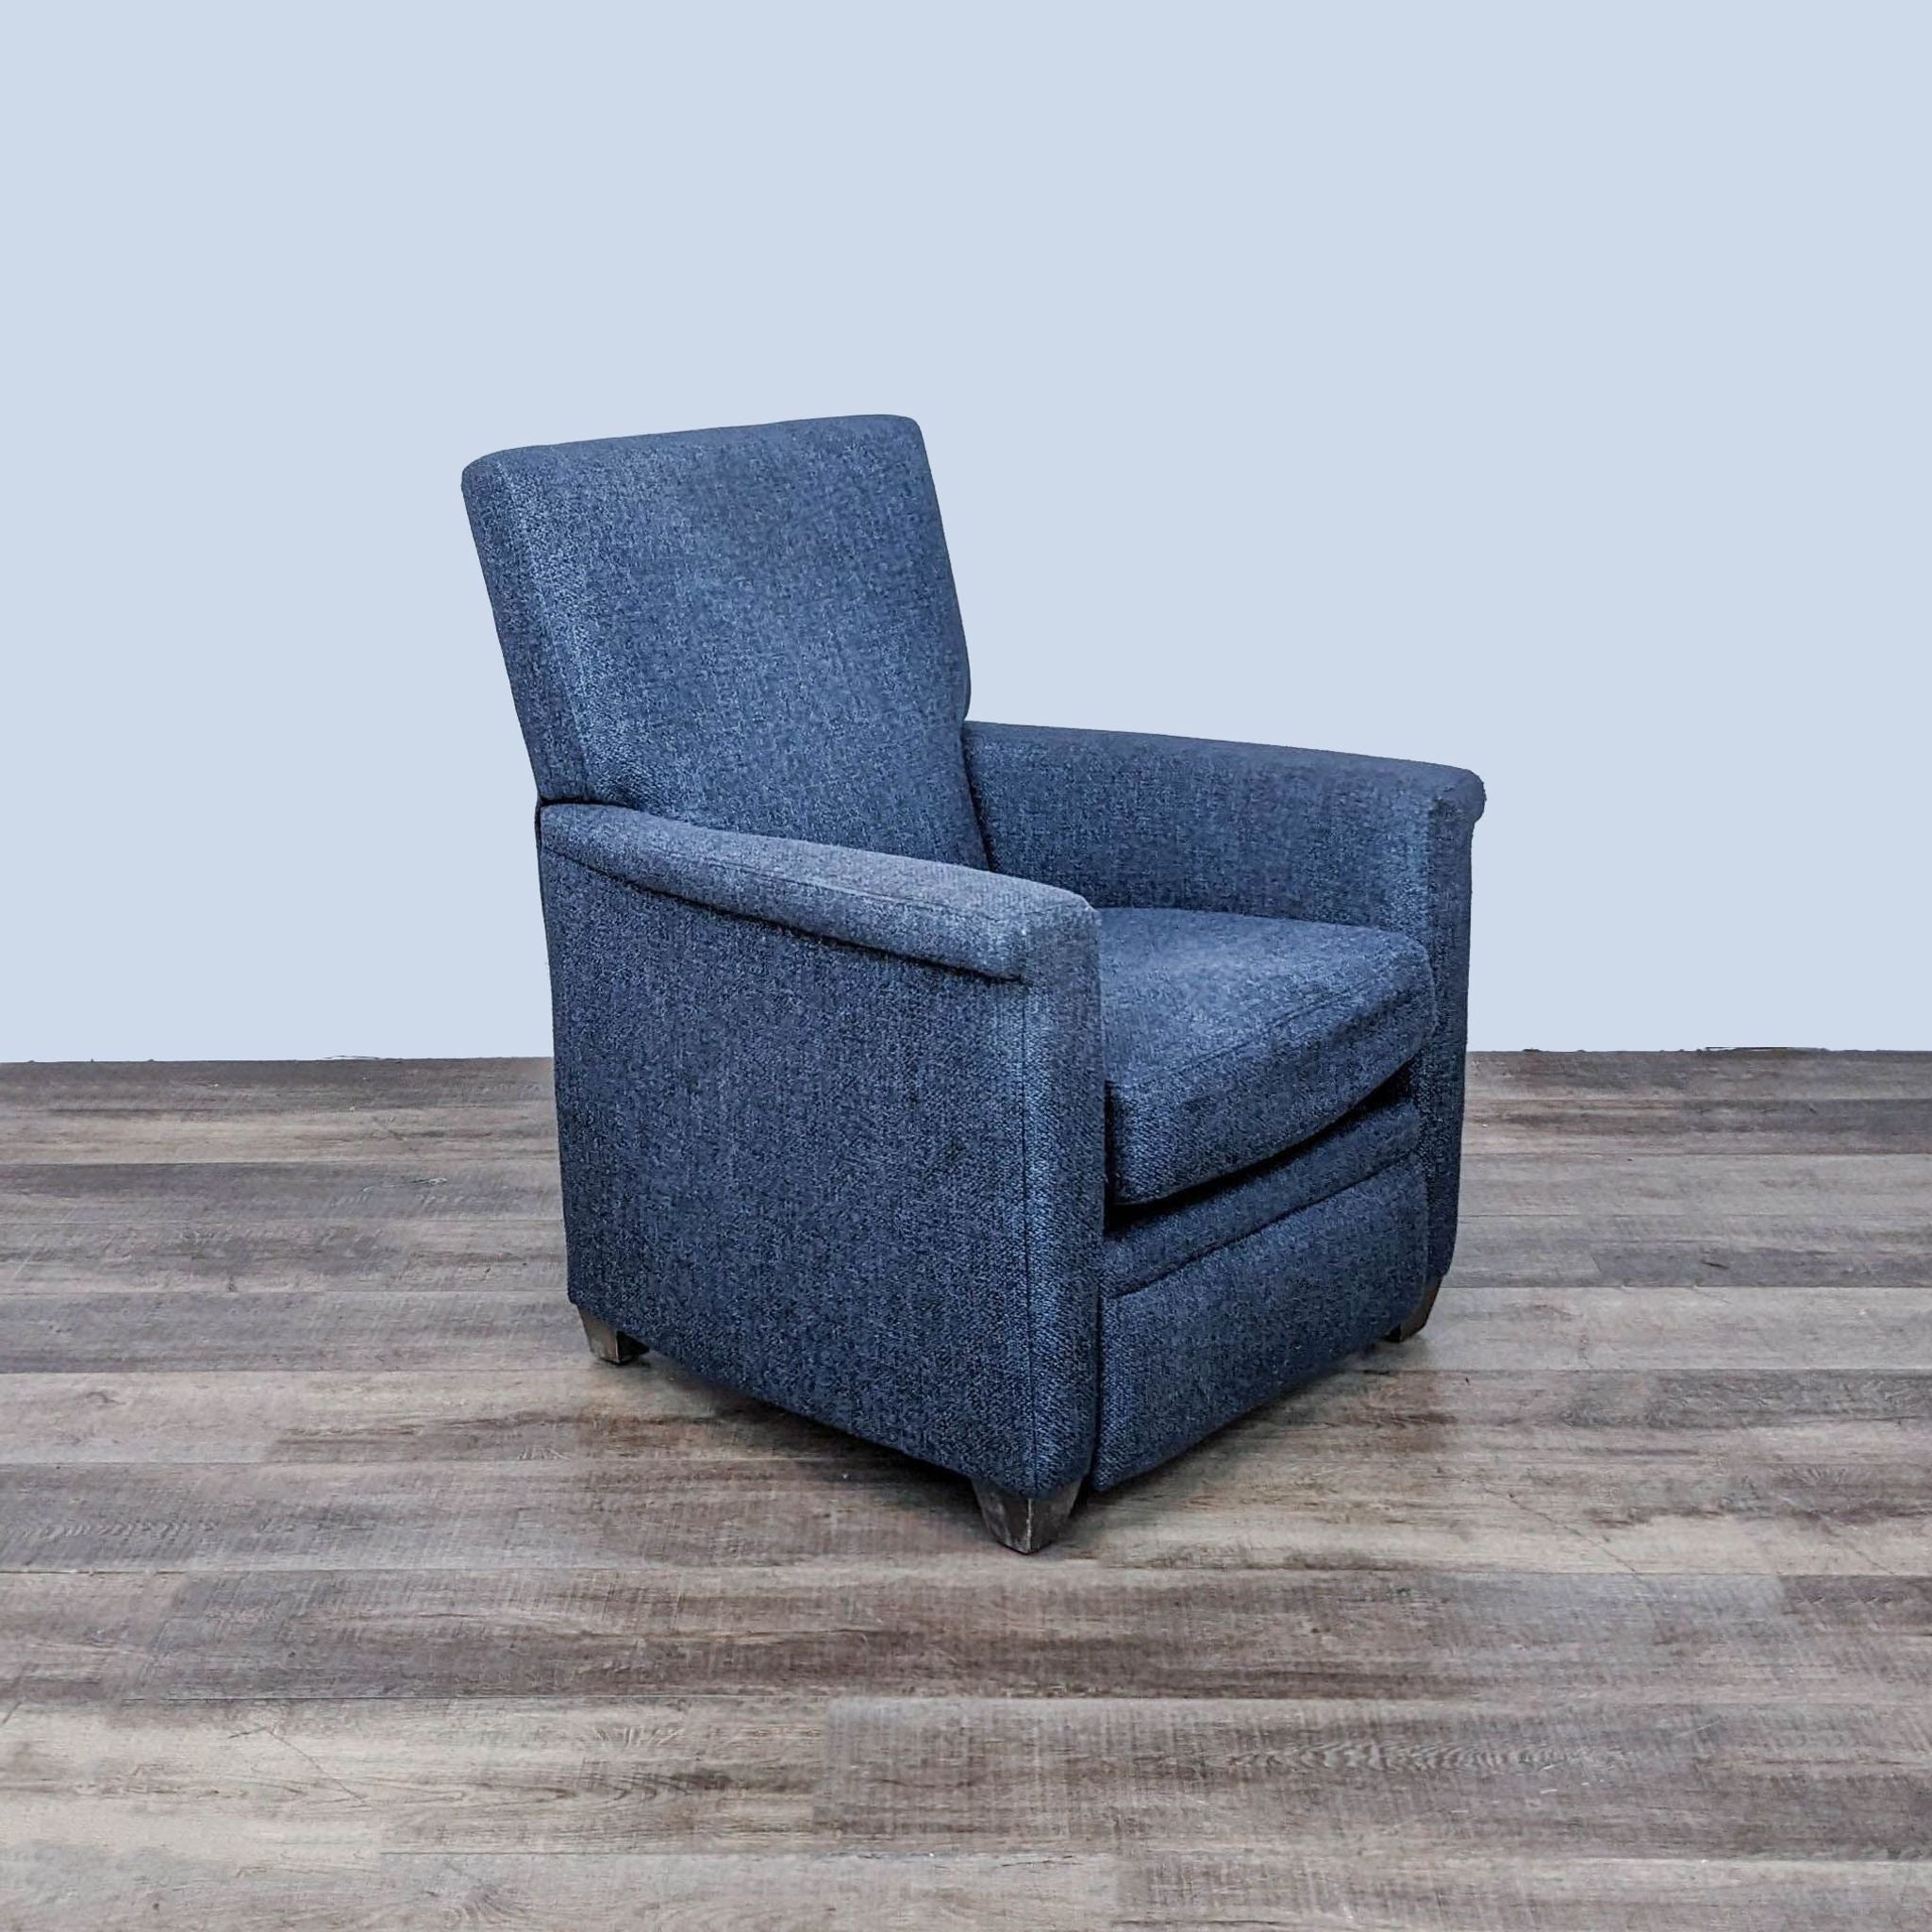 Crate & Barrel Declan manual recliner with a sturdy frame and soft blue upholstery, featuring armrests and a recline function.